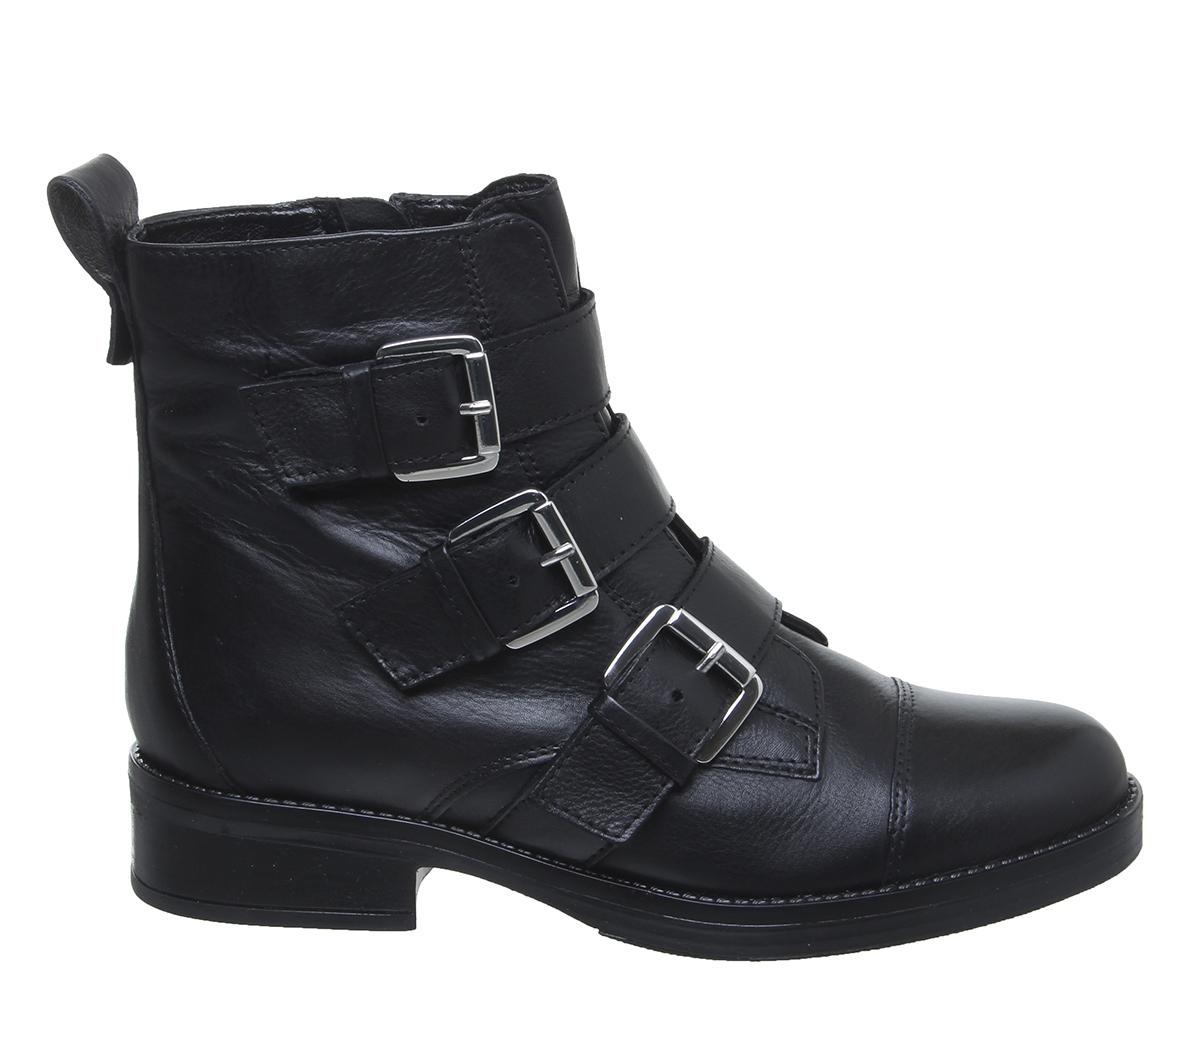 Office Anticipate Buckle Biker Boots Black Leather - Ankle Boots